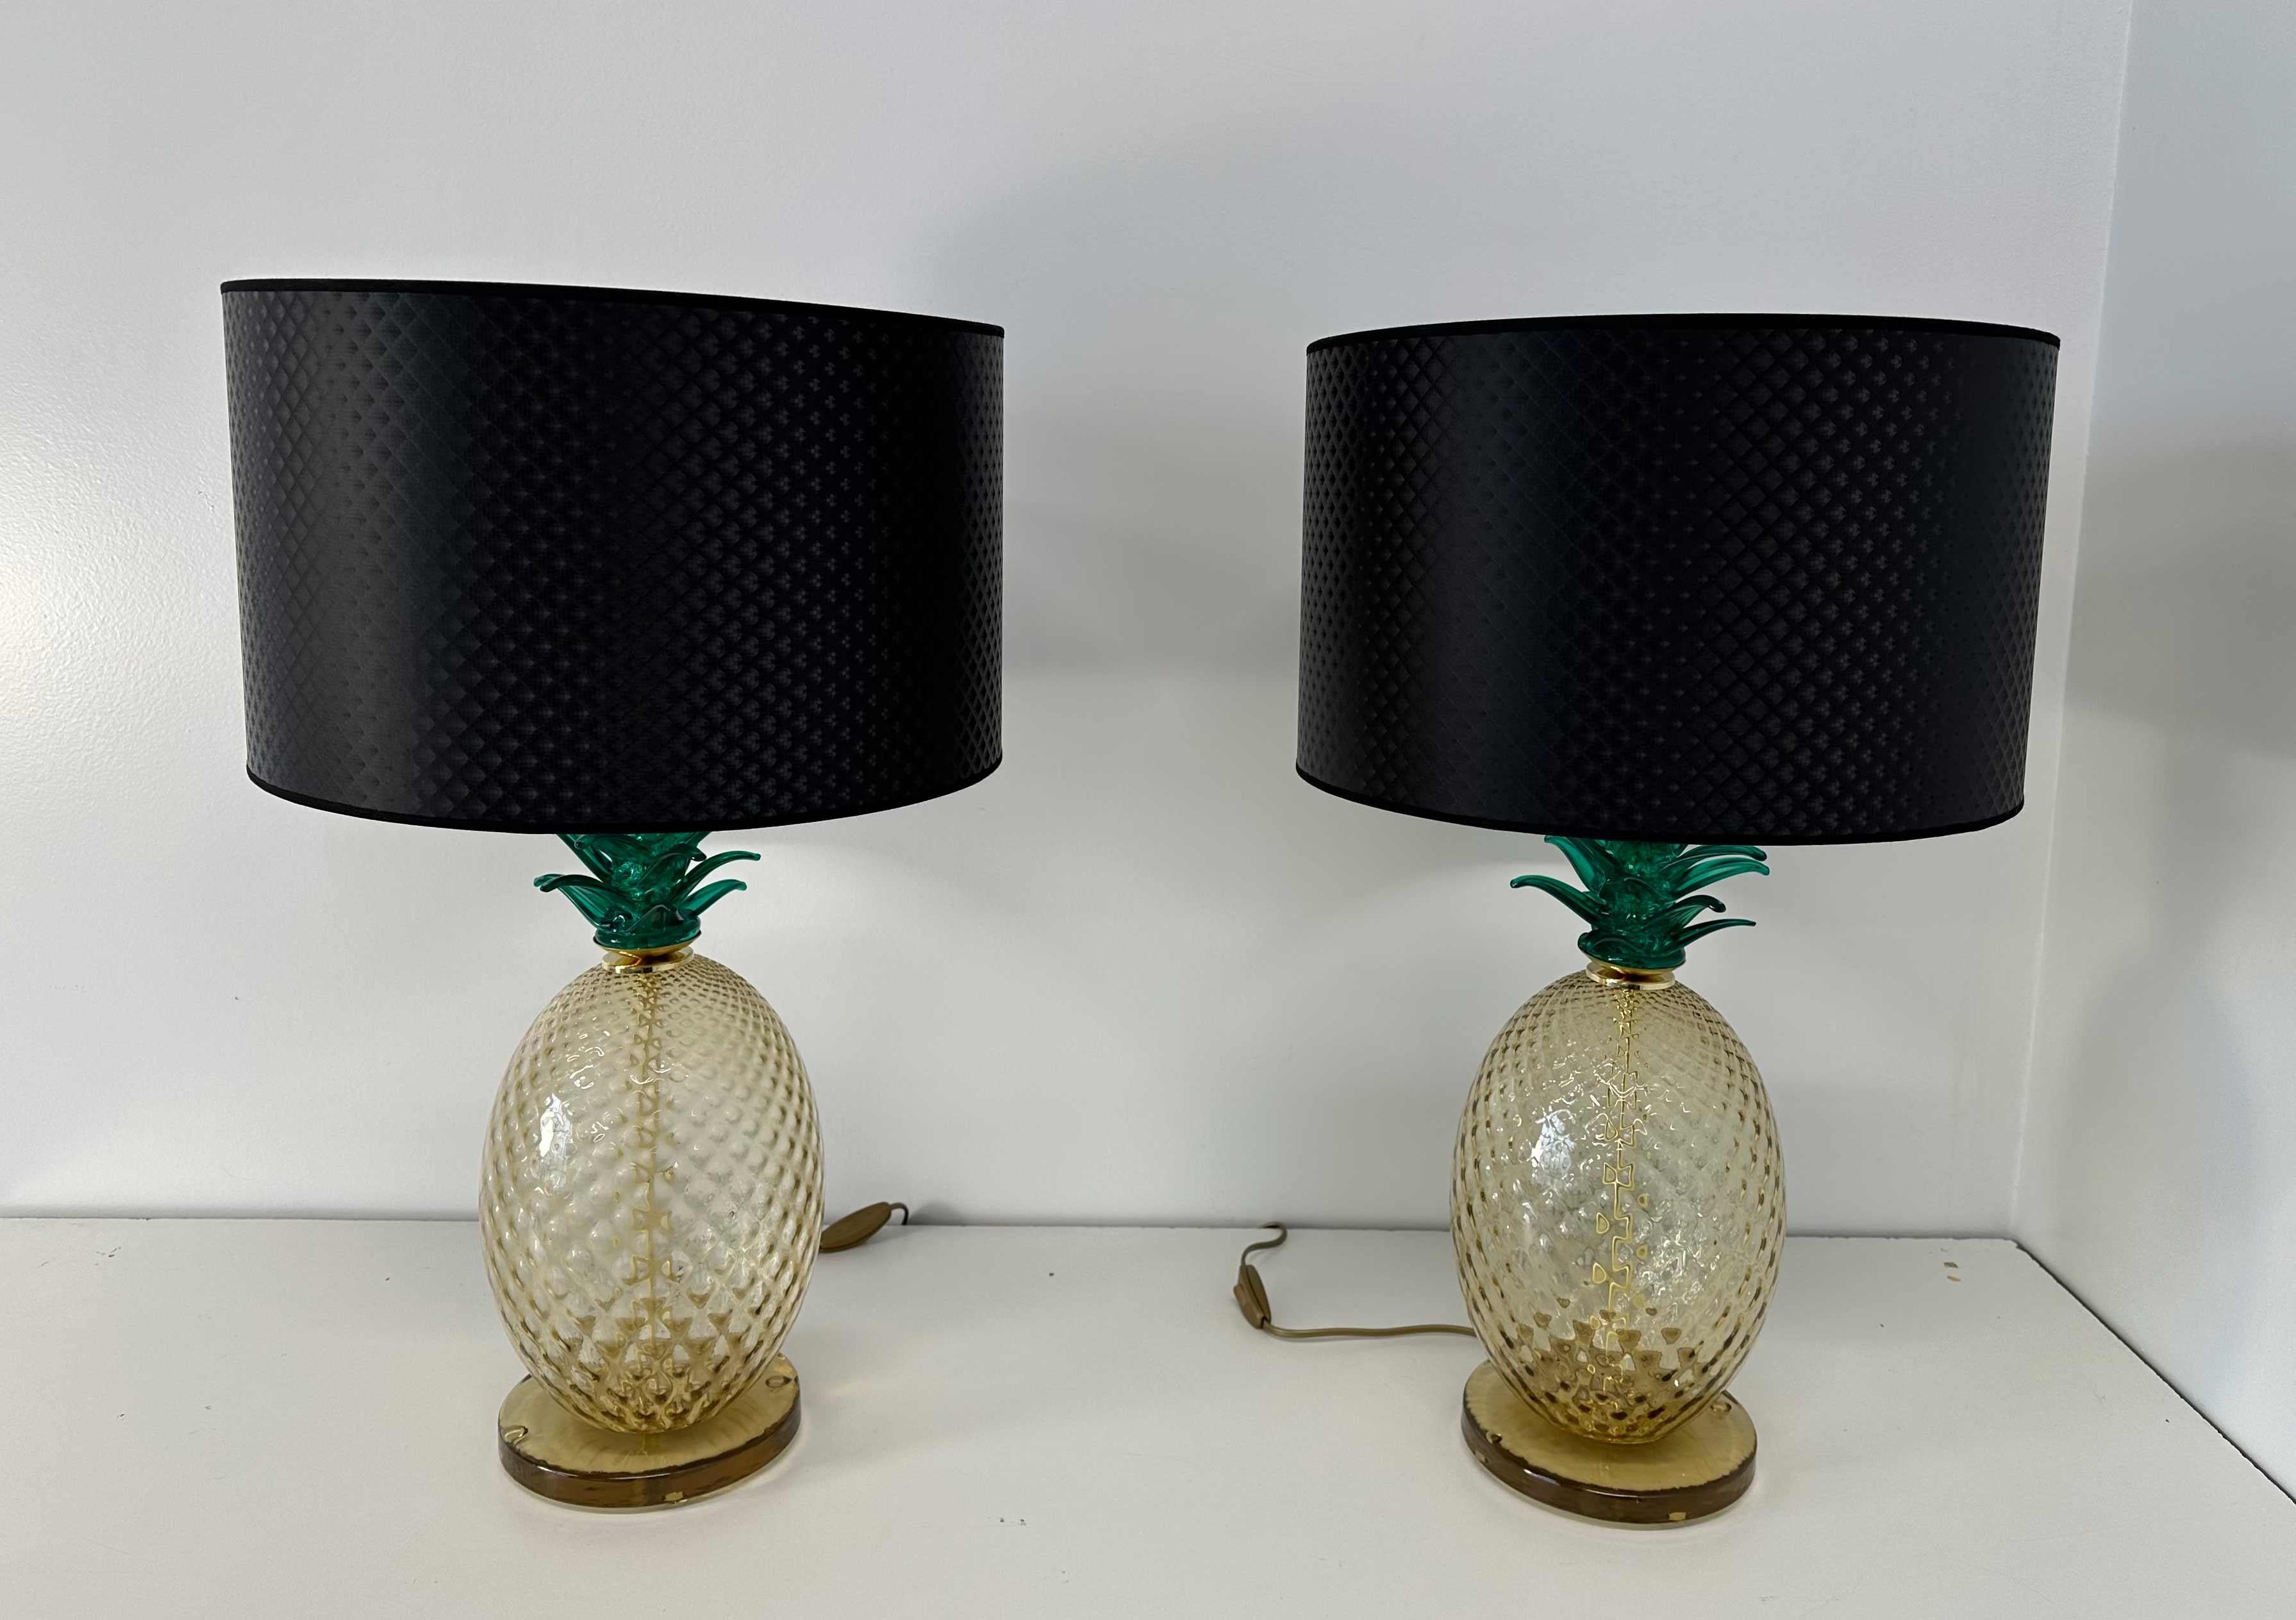 Pair of Italian Art Deco Pineapple Murano Glass Lamps with Lampshades  For Sale 6